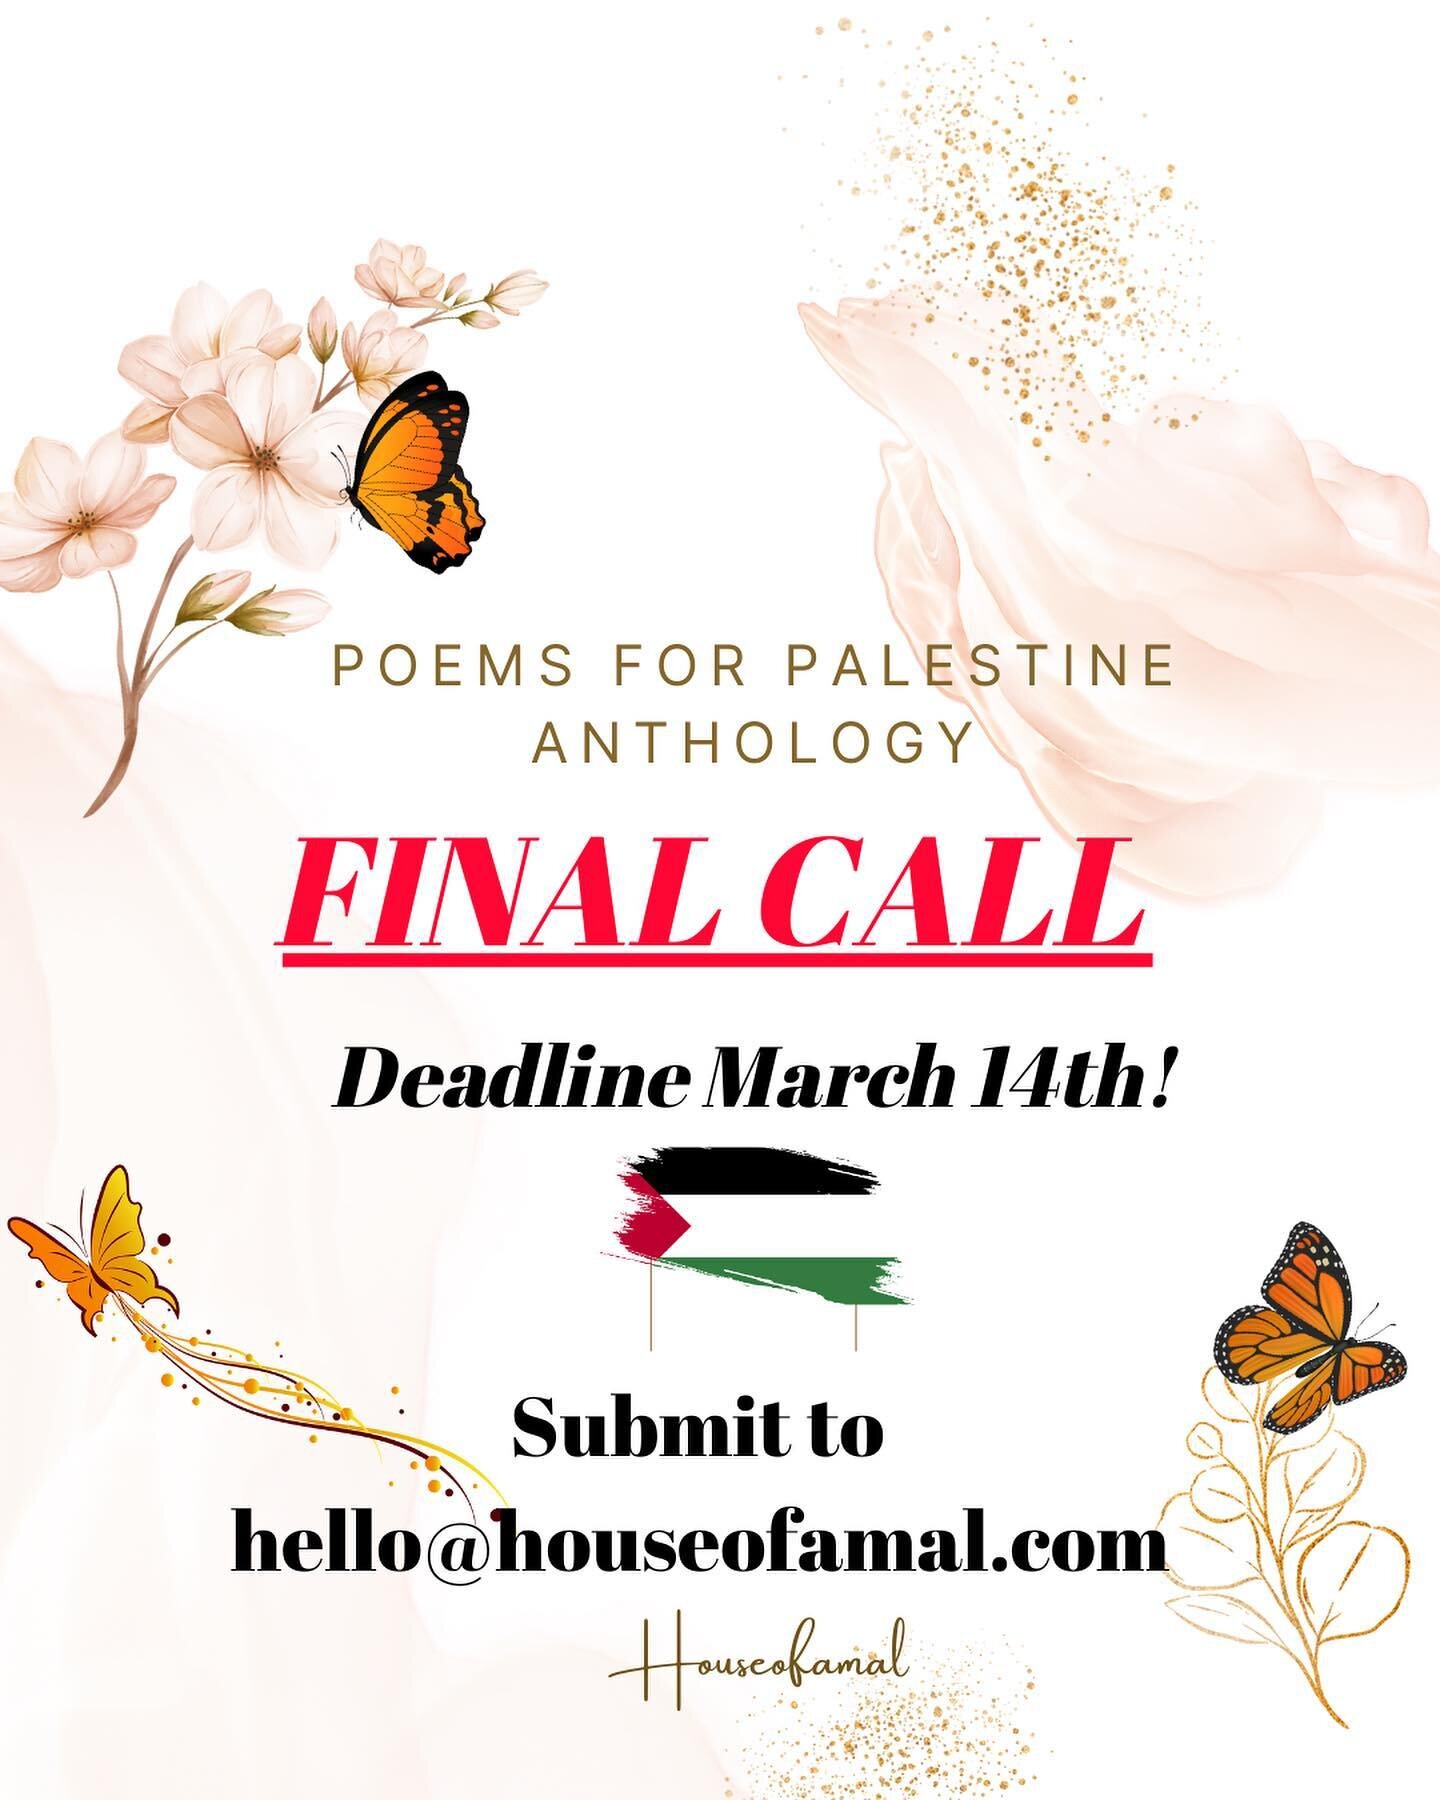 Salam Everyone! Friendly Reminder, &ldquo;Poems for Palestine Anthology&rdquo; are opened for submission &amp; the deadline to submit is March 14th!!!

Submit your submissions to 
hello@houseofamal.com